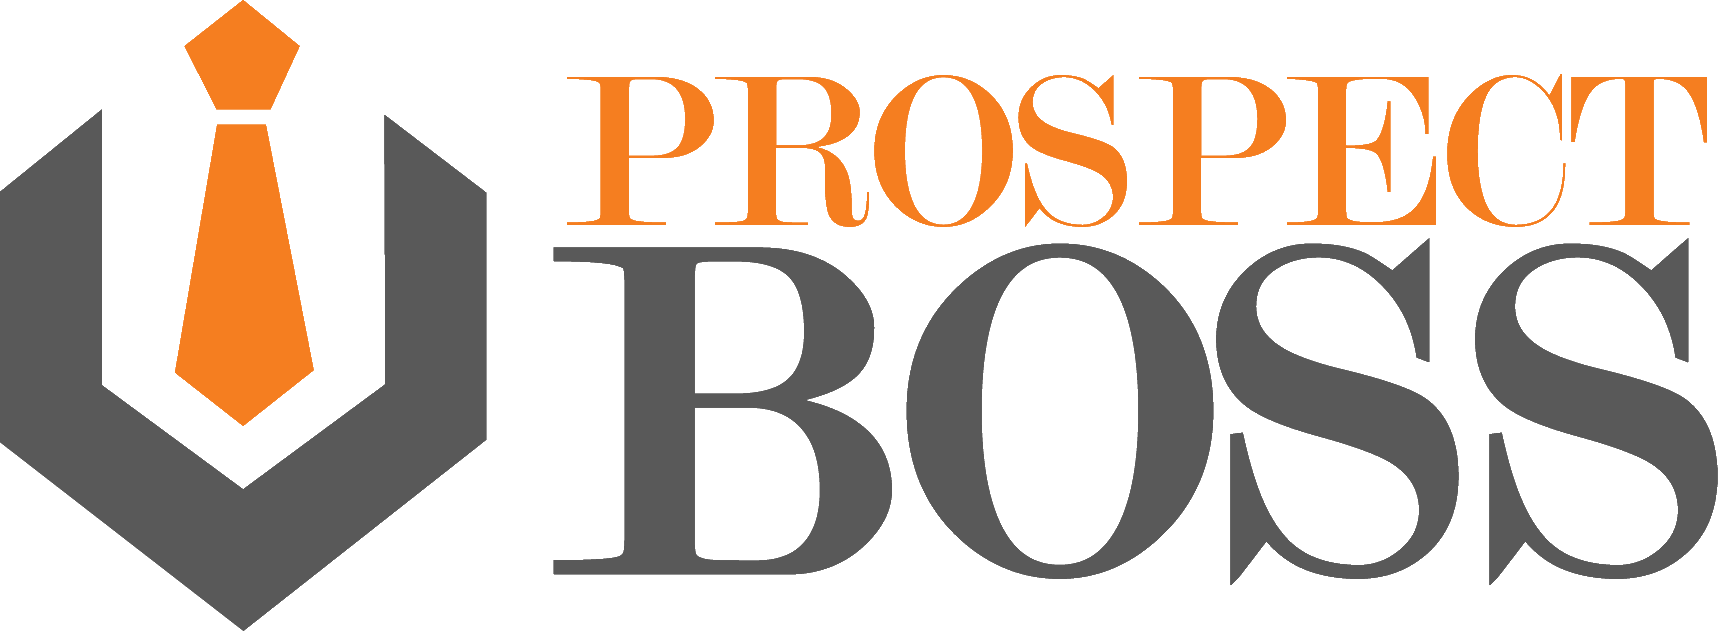 ProspectBoss-newcolor